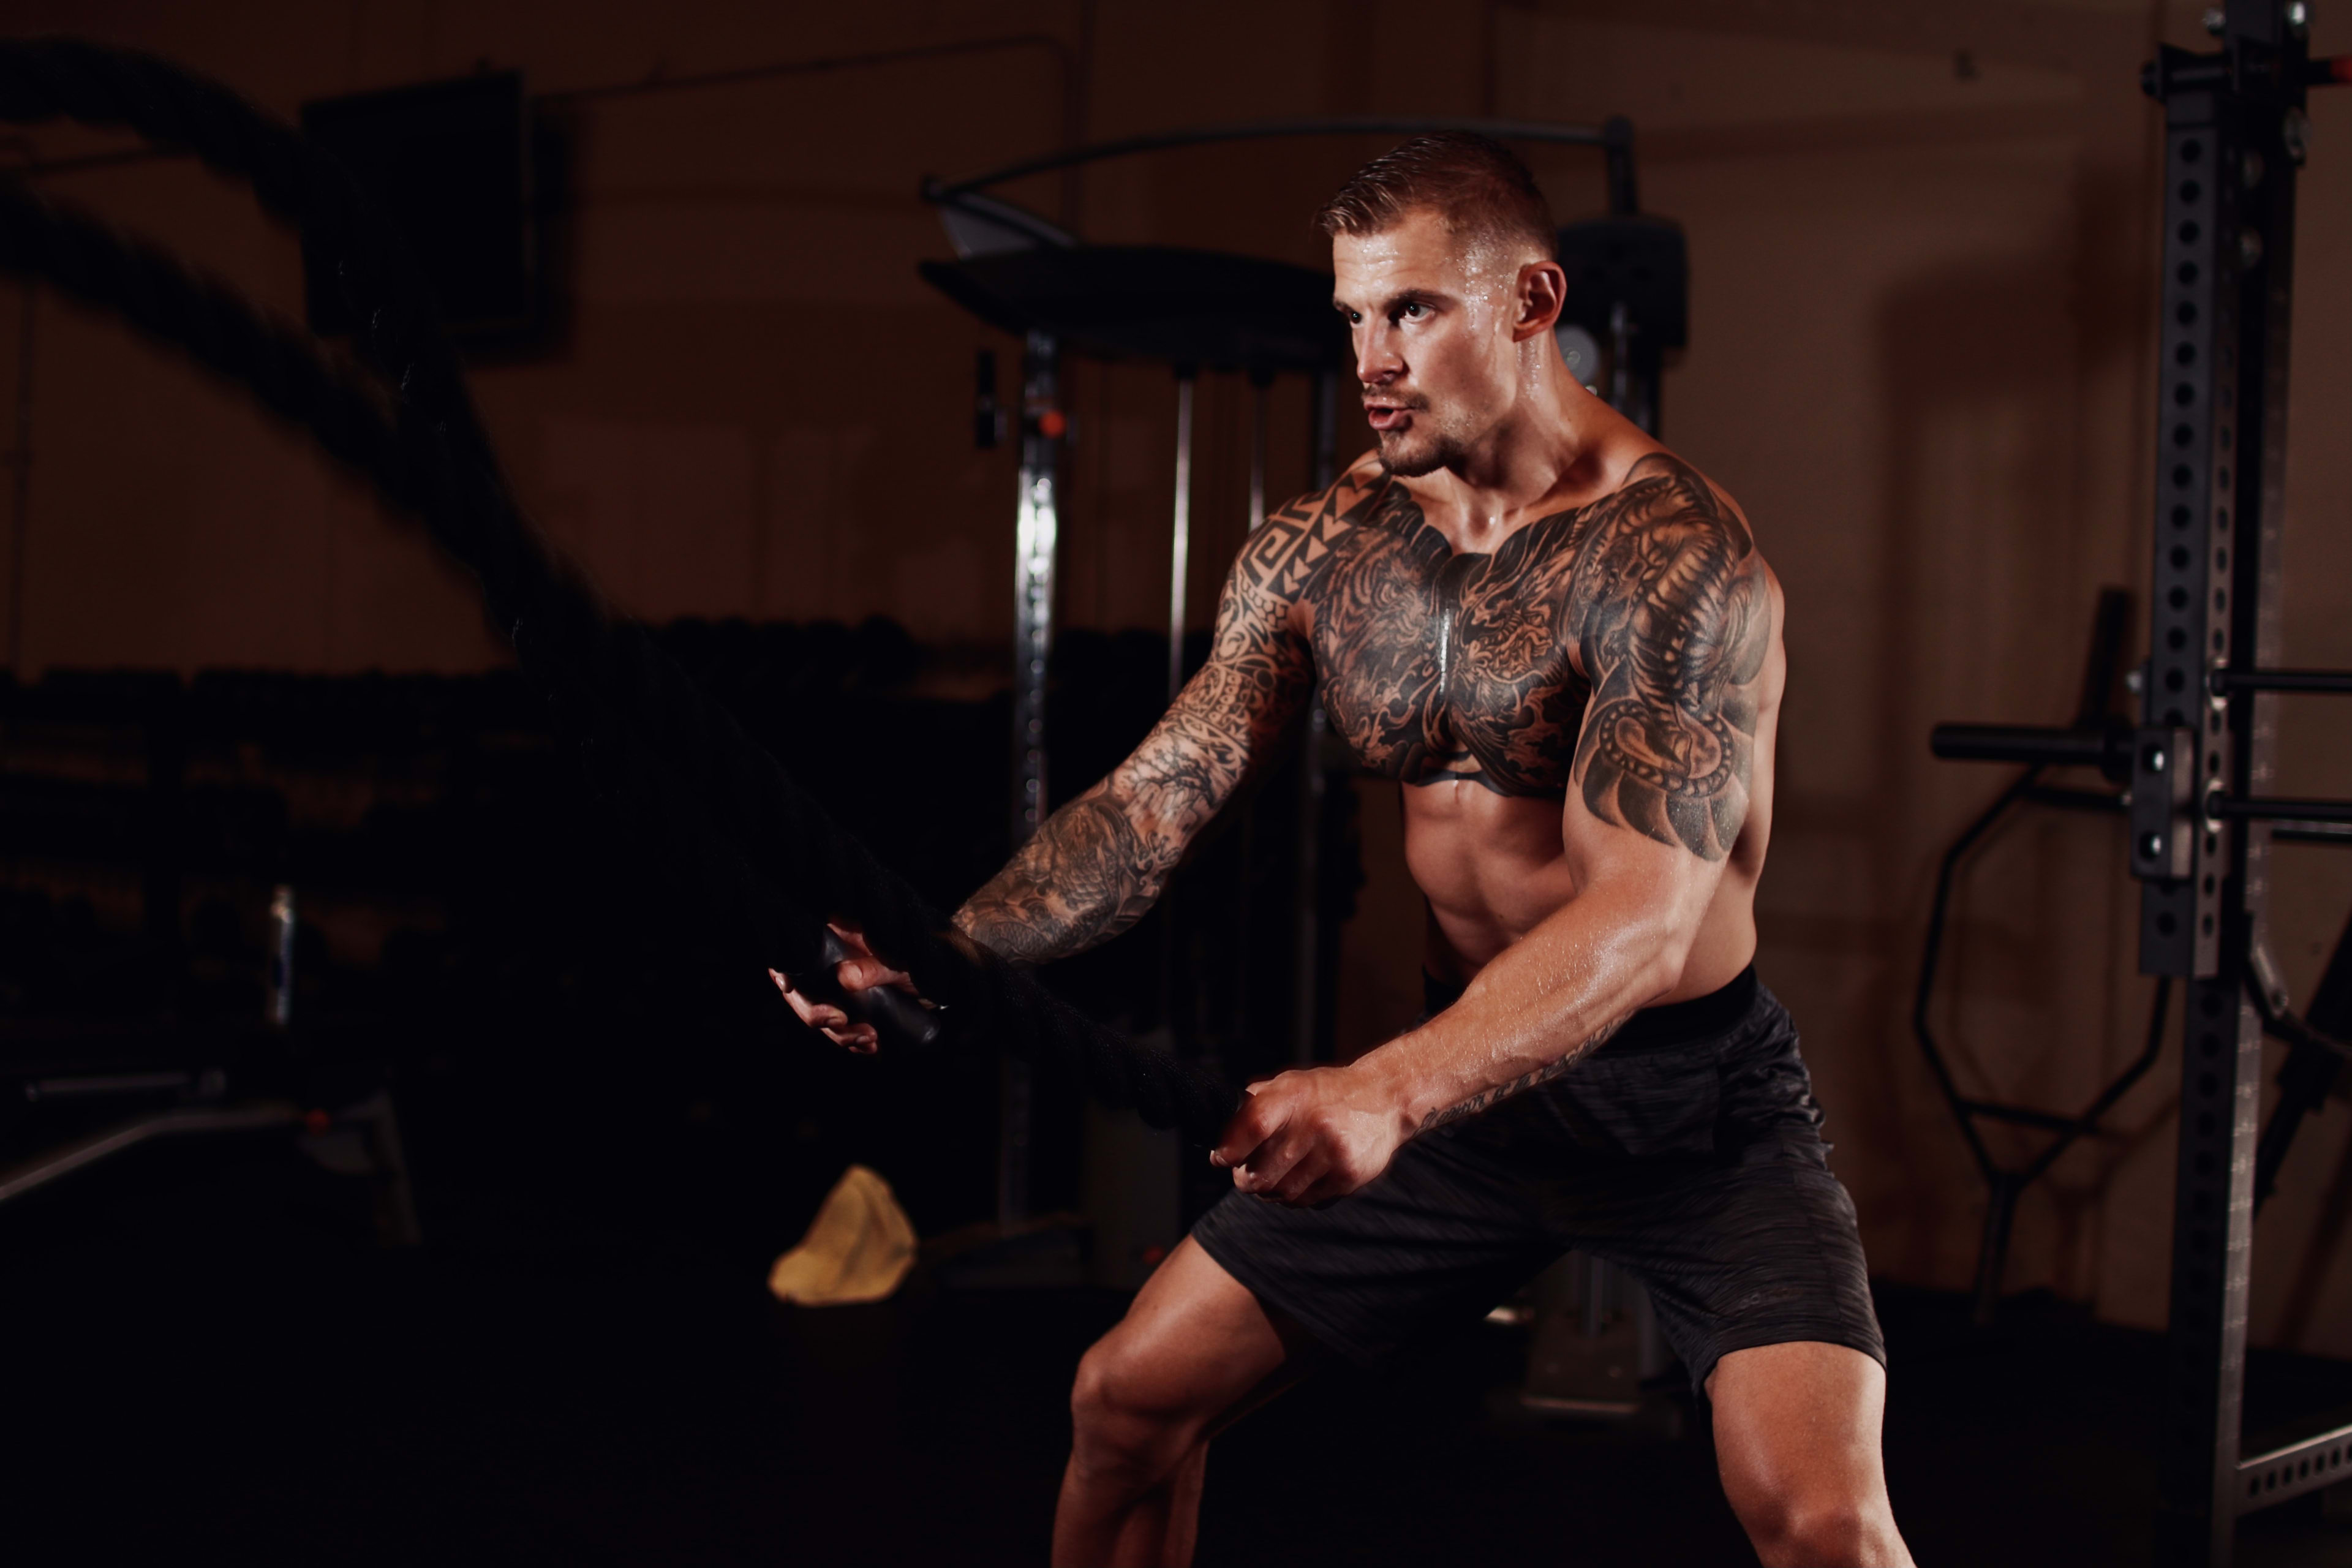 A man with a tattoo on his arm posing for a fitness photo shoot.